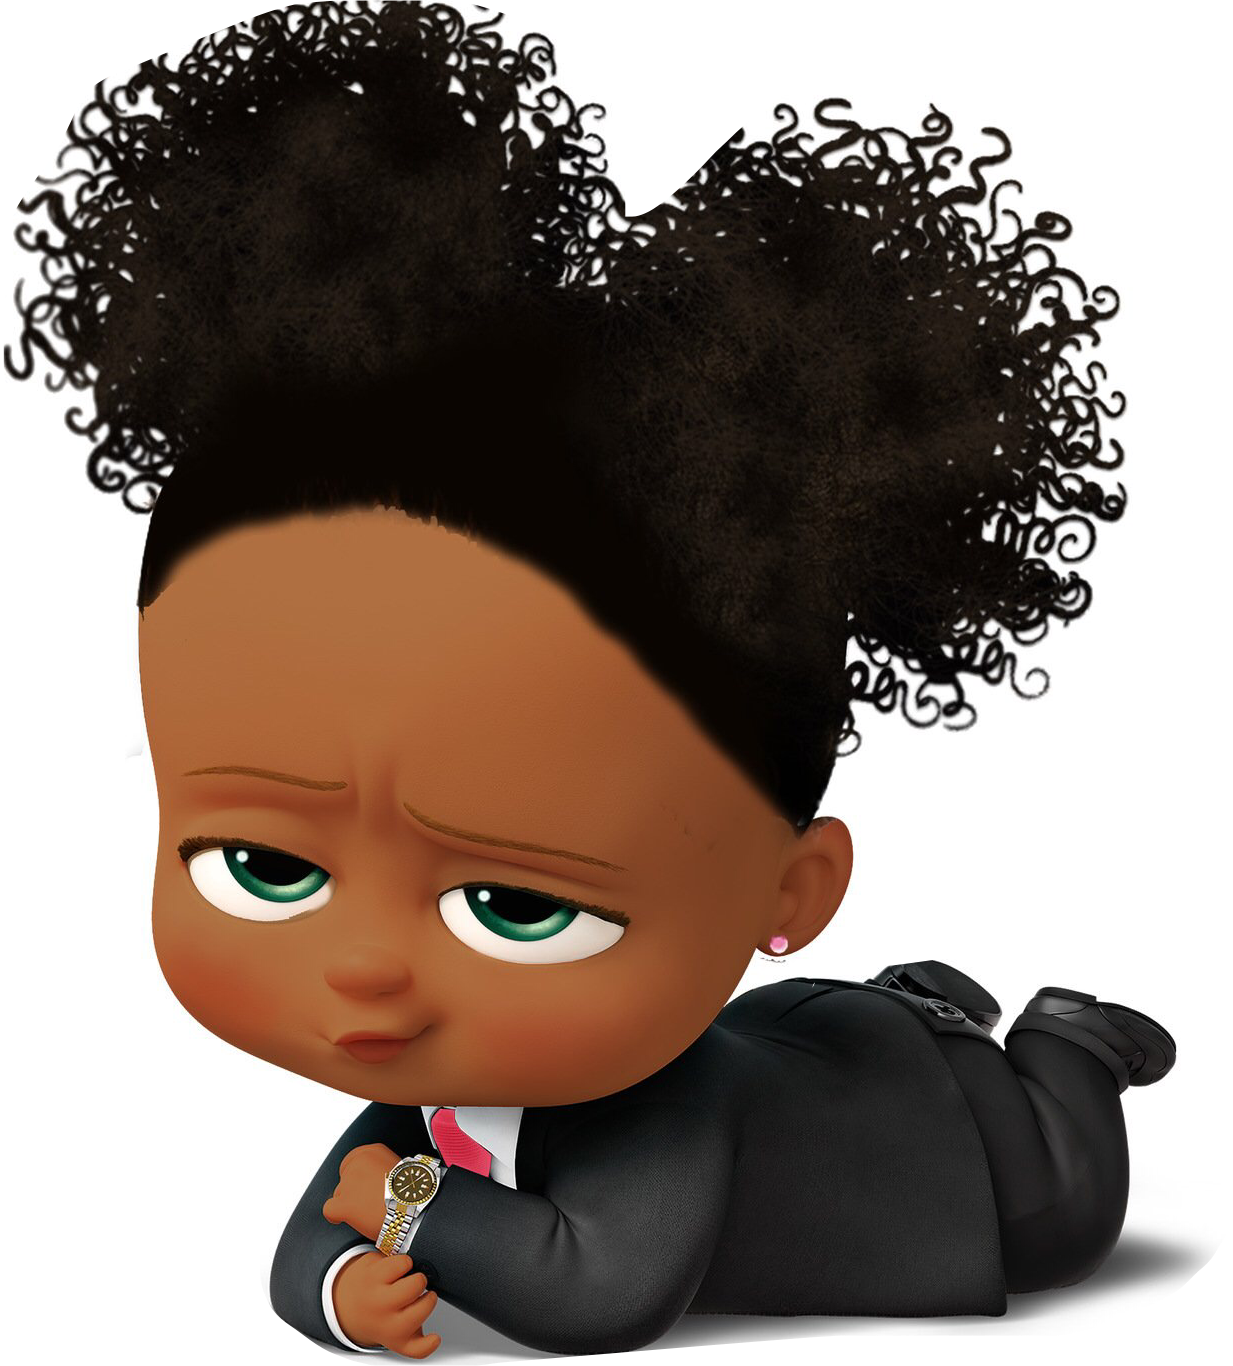 Download The Newest bossbaby Stickers on PicsArt.